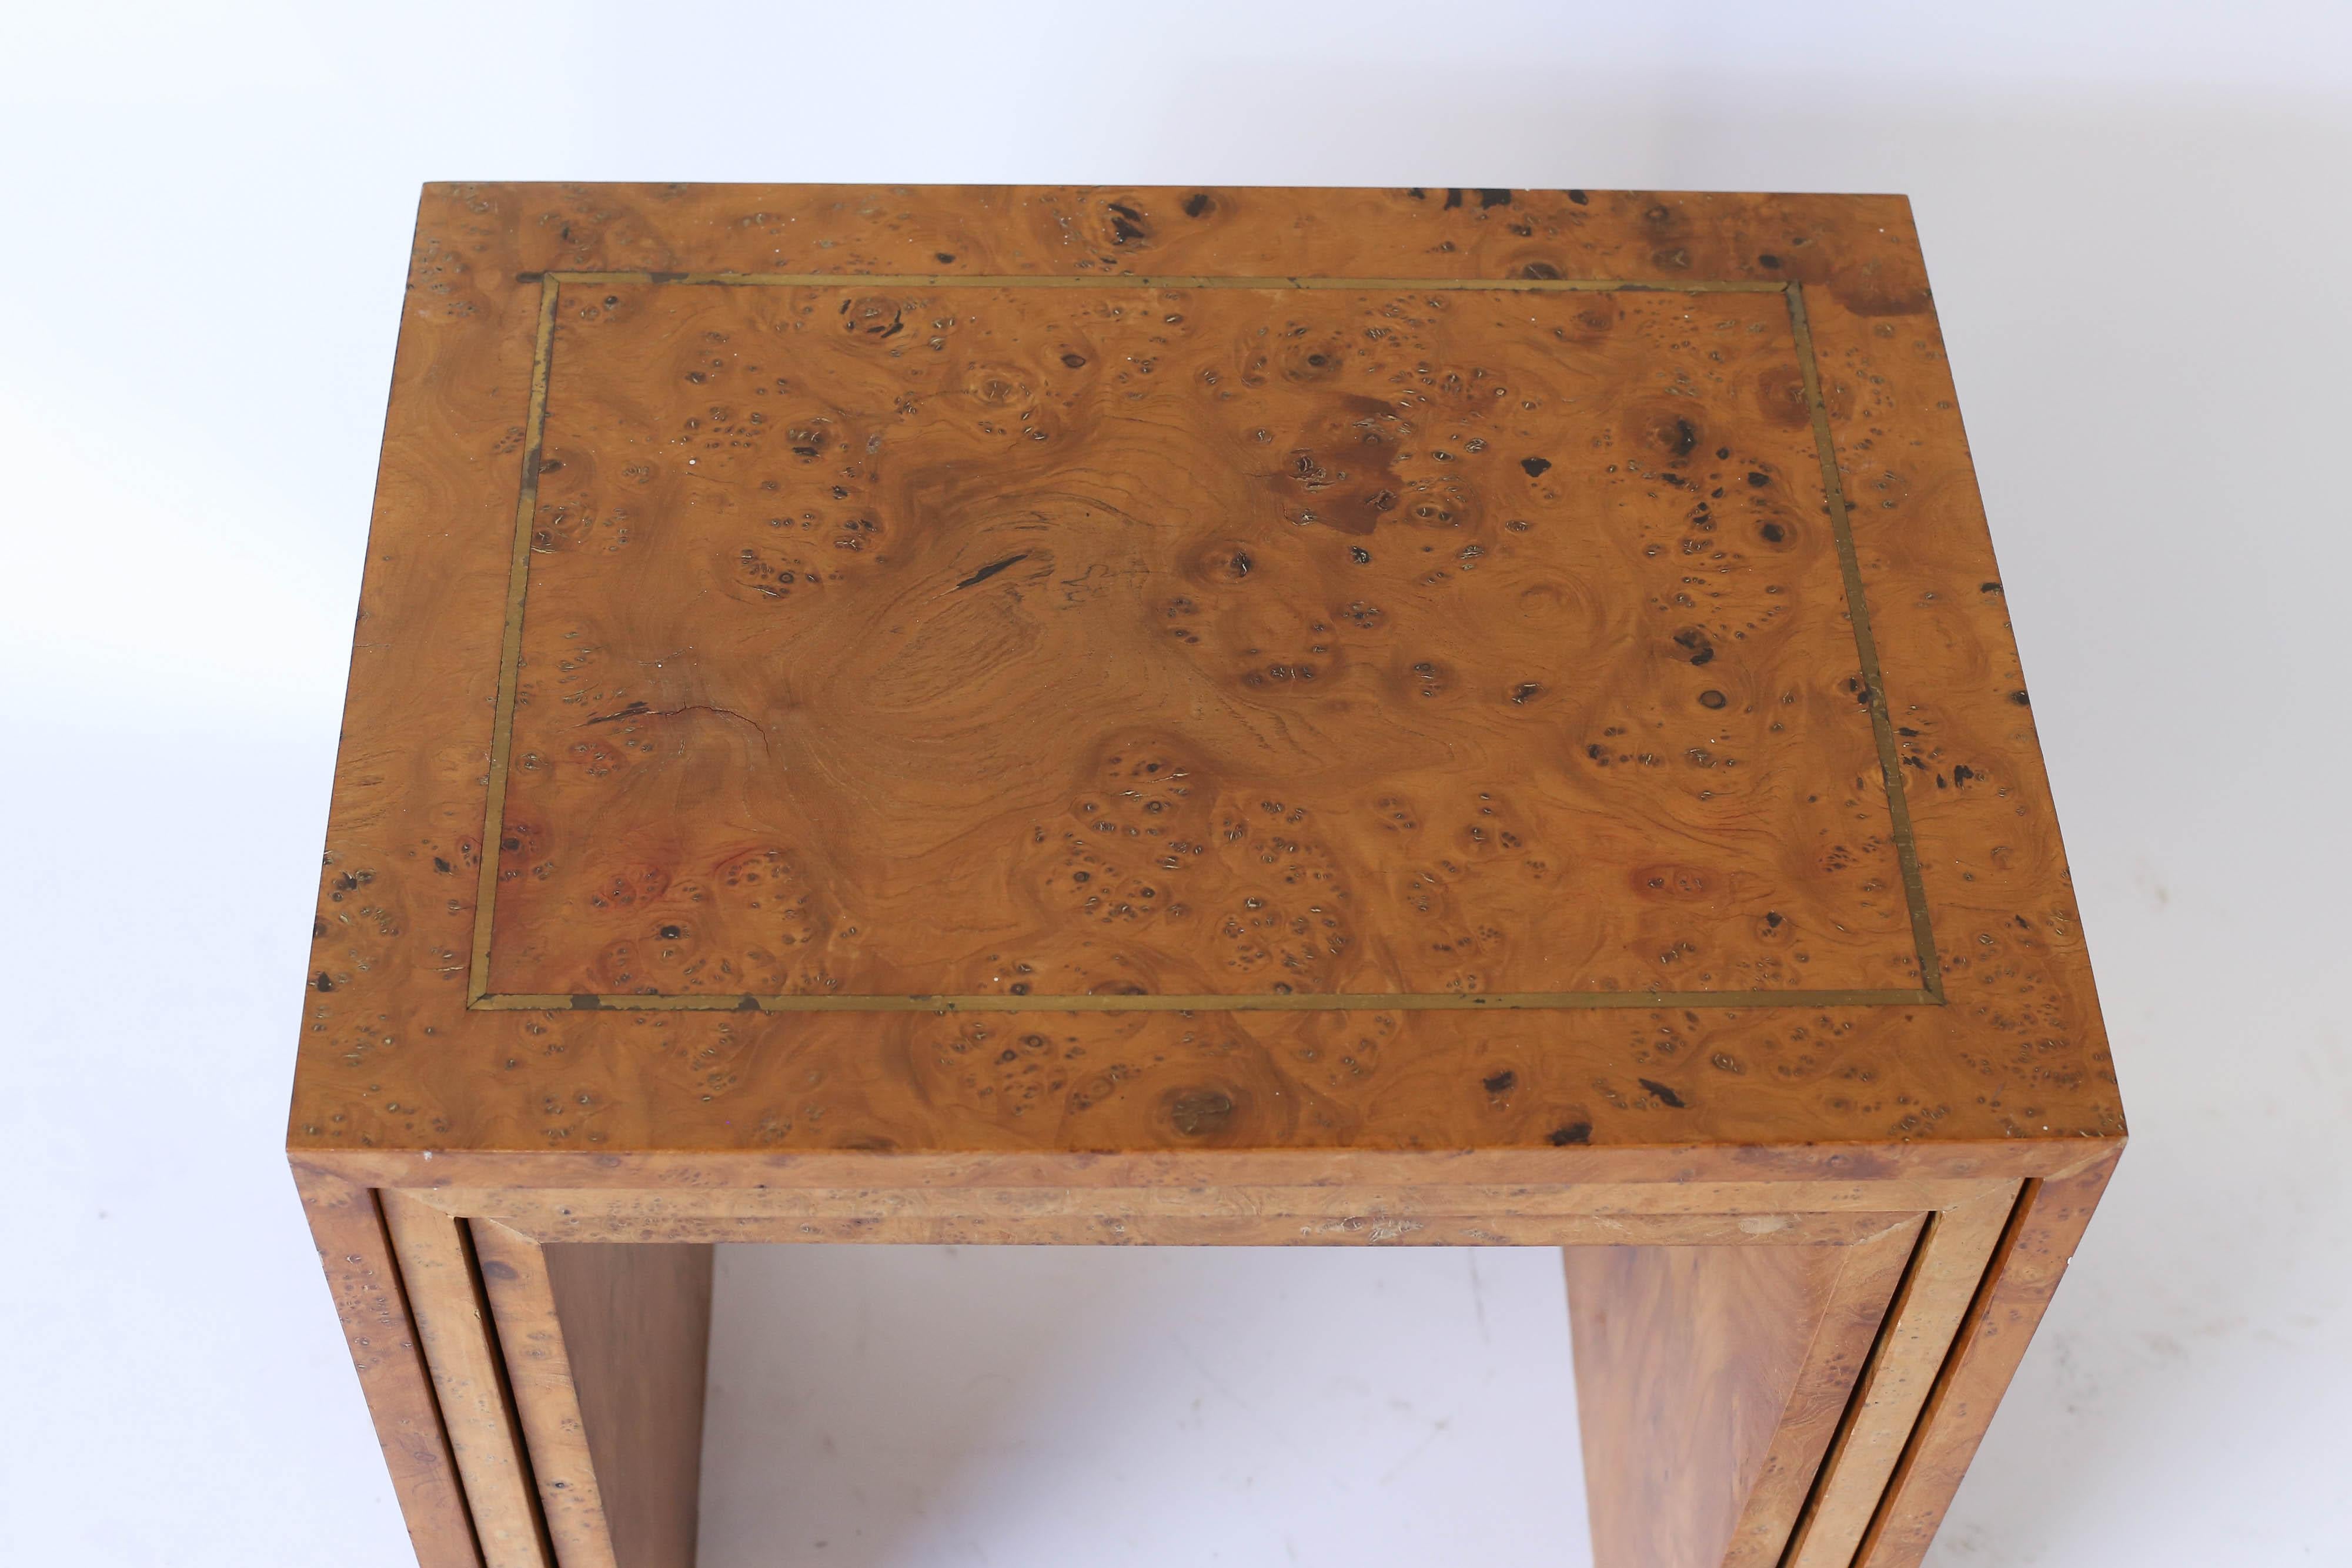 Set of three midcentury burl wood nesting tables with brass inlay. Nestled together the largest table is 19.75